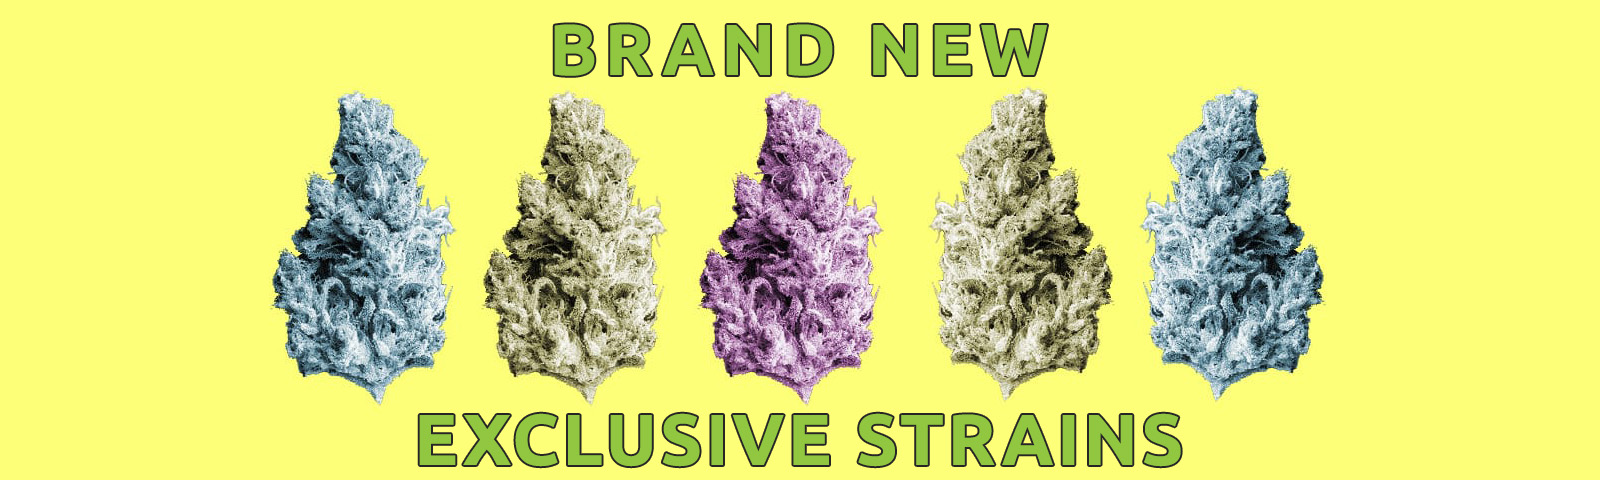 best-weed-strains-right-now wide-1600x480